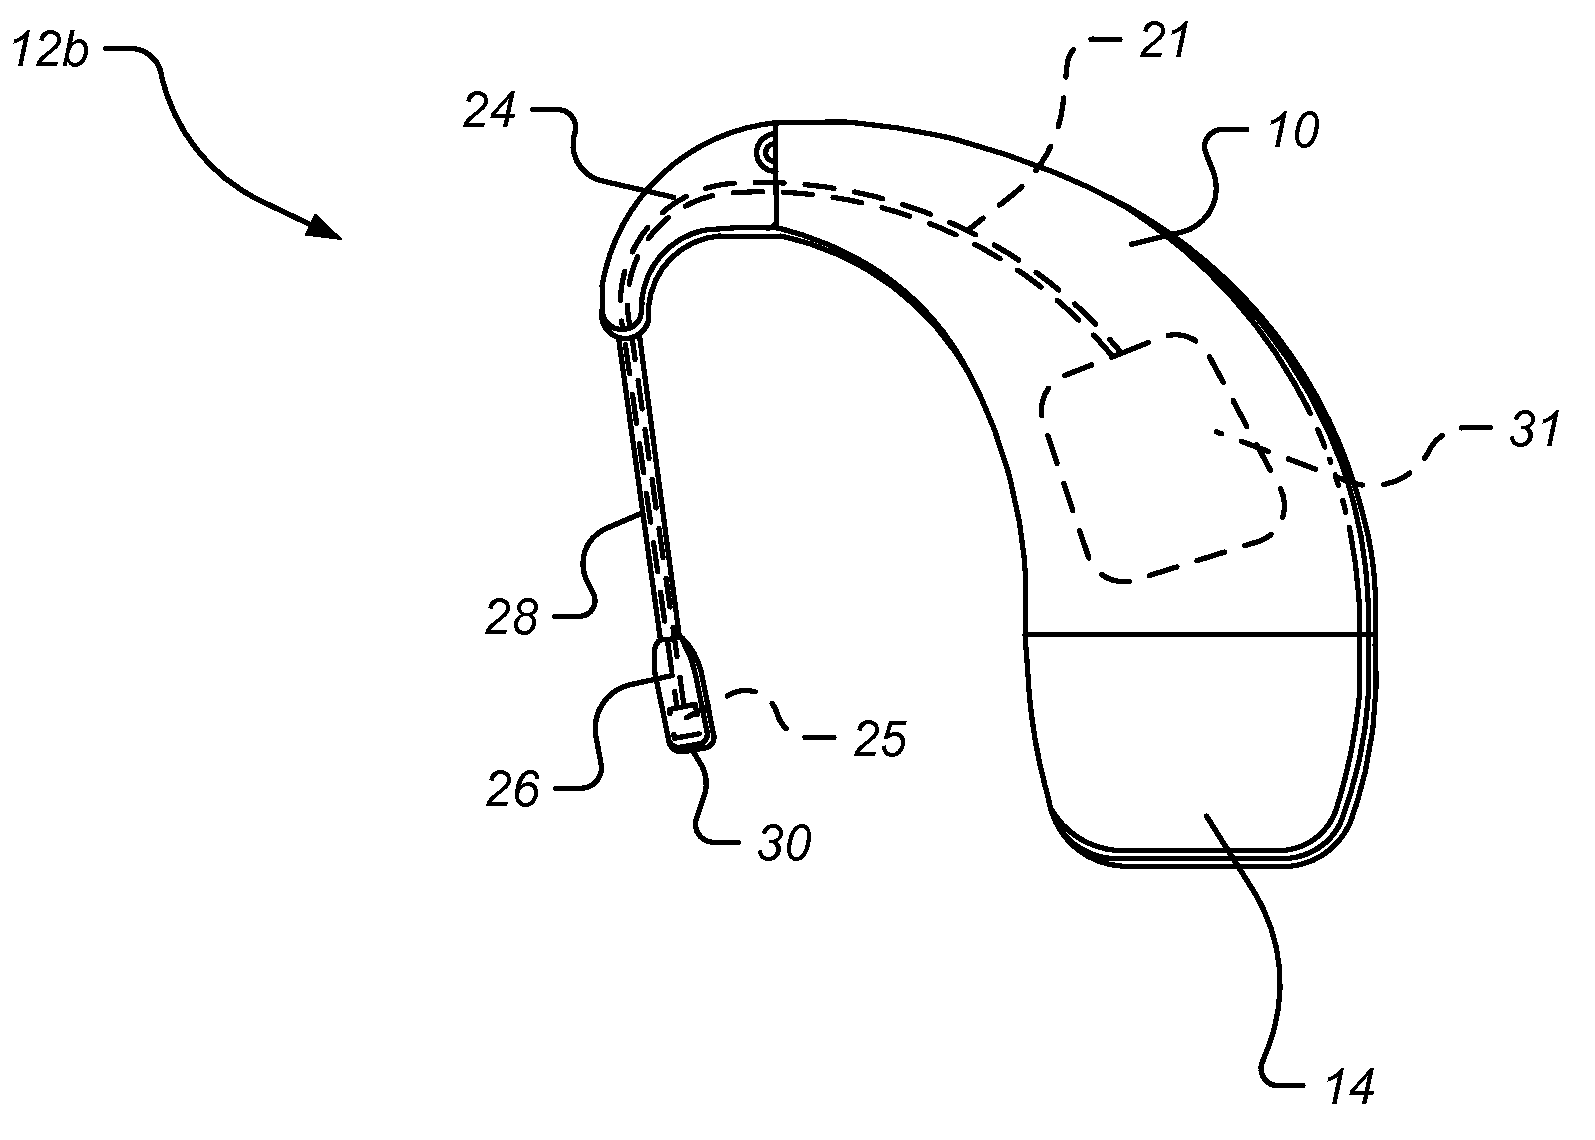 Accessory Adapter For Cochlear Implant System Providing Simultaneous T-Mic and External Audio Input